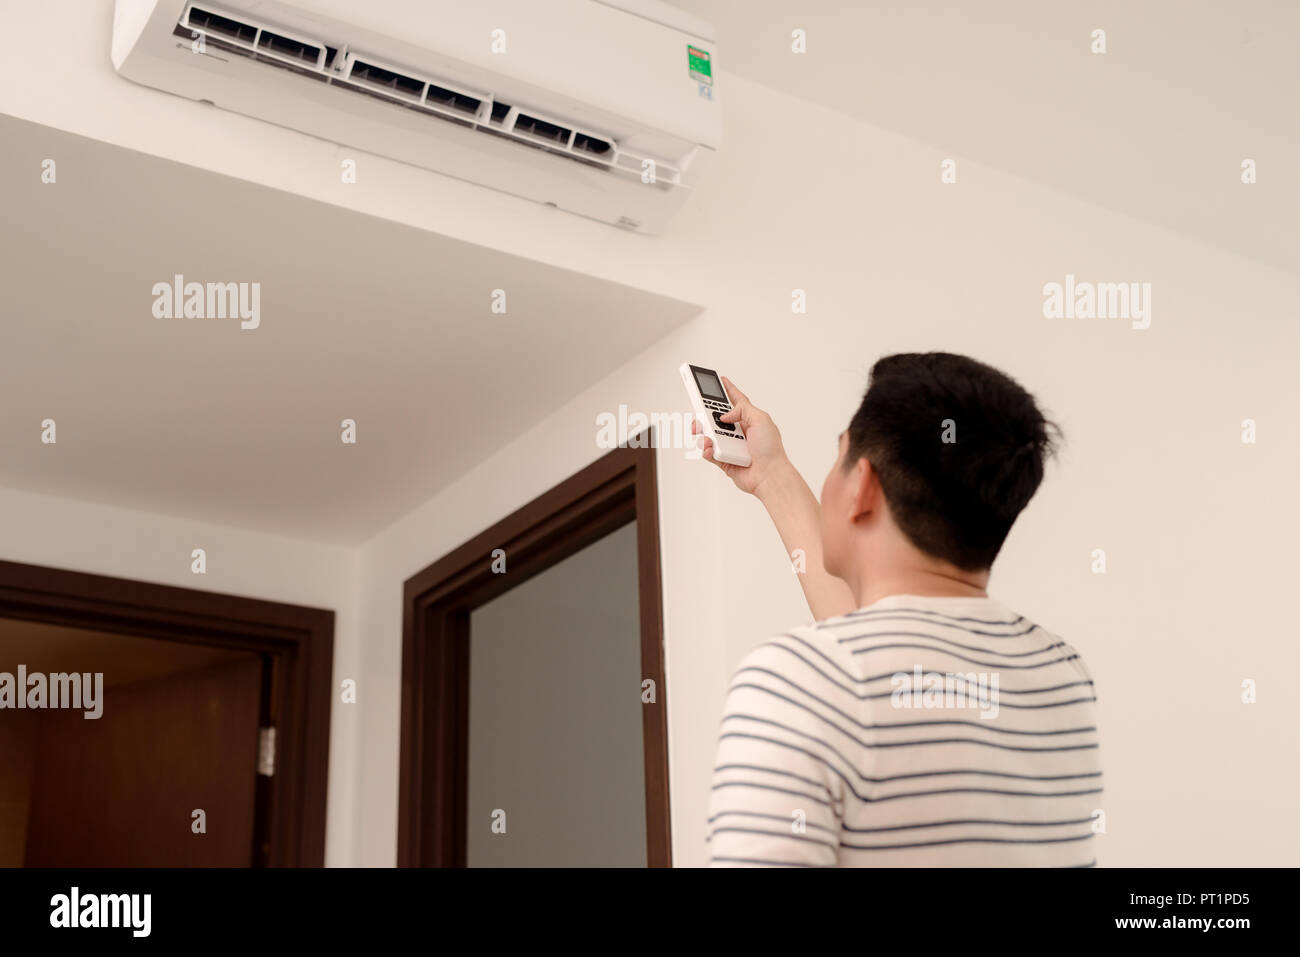 Young man switching on or adjusting the wall mounted air conditioner in the living room with a remote control Stock Photo